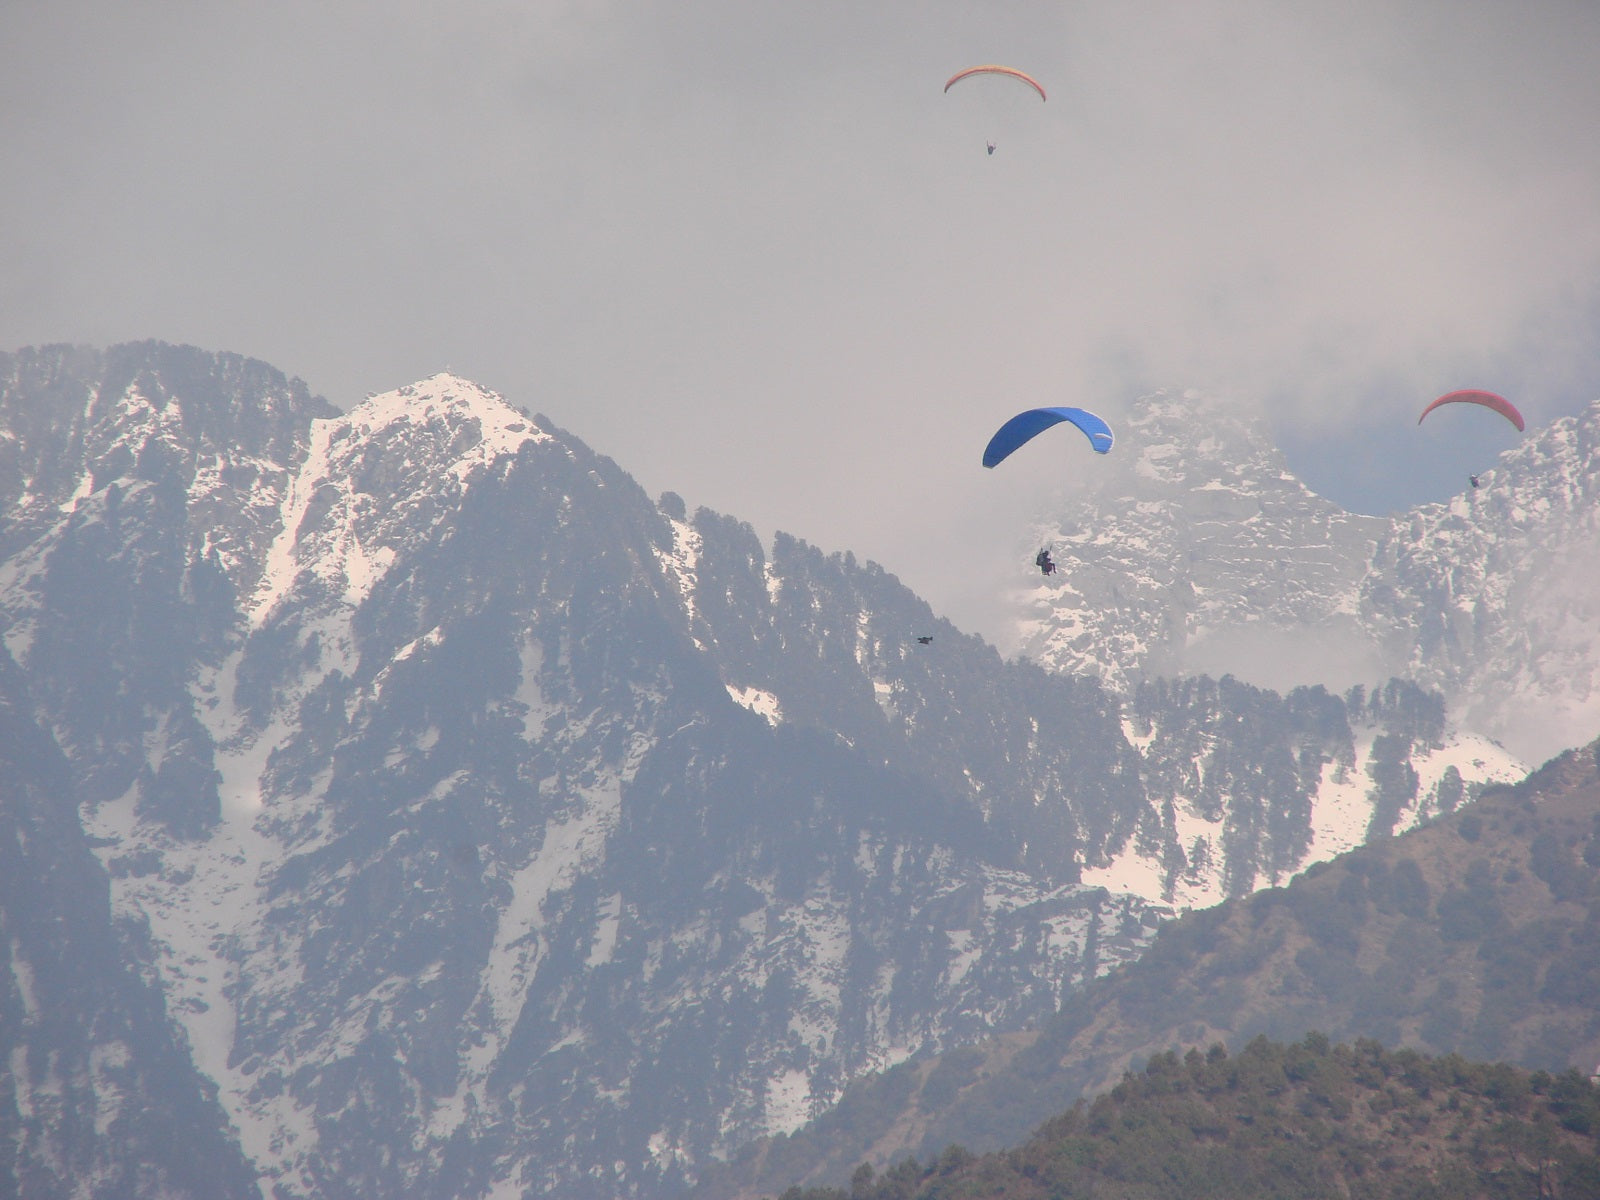 Paragliding in the Indian Himalayas